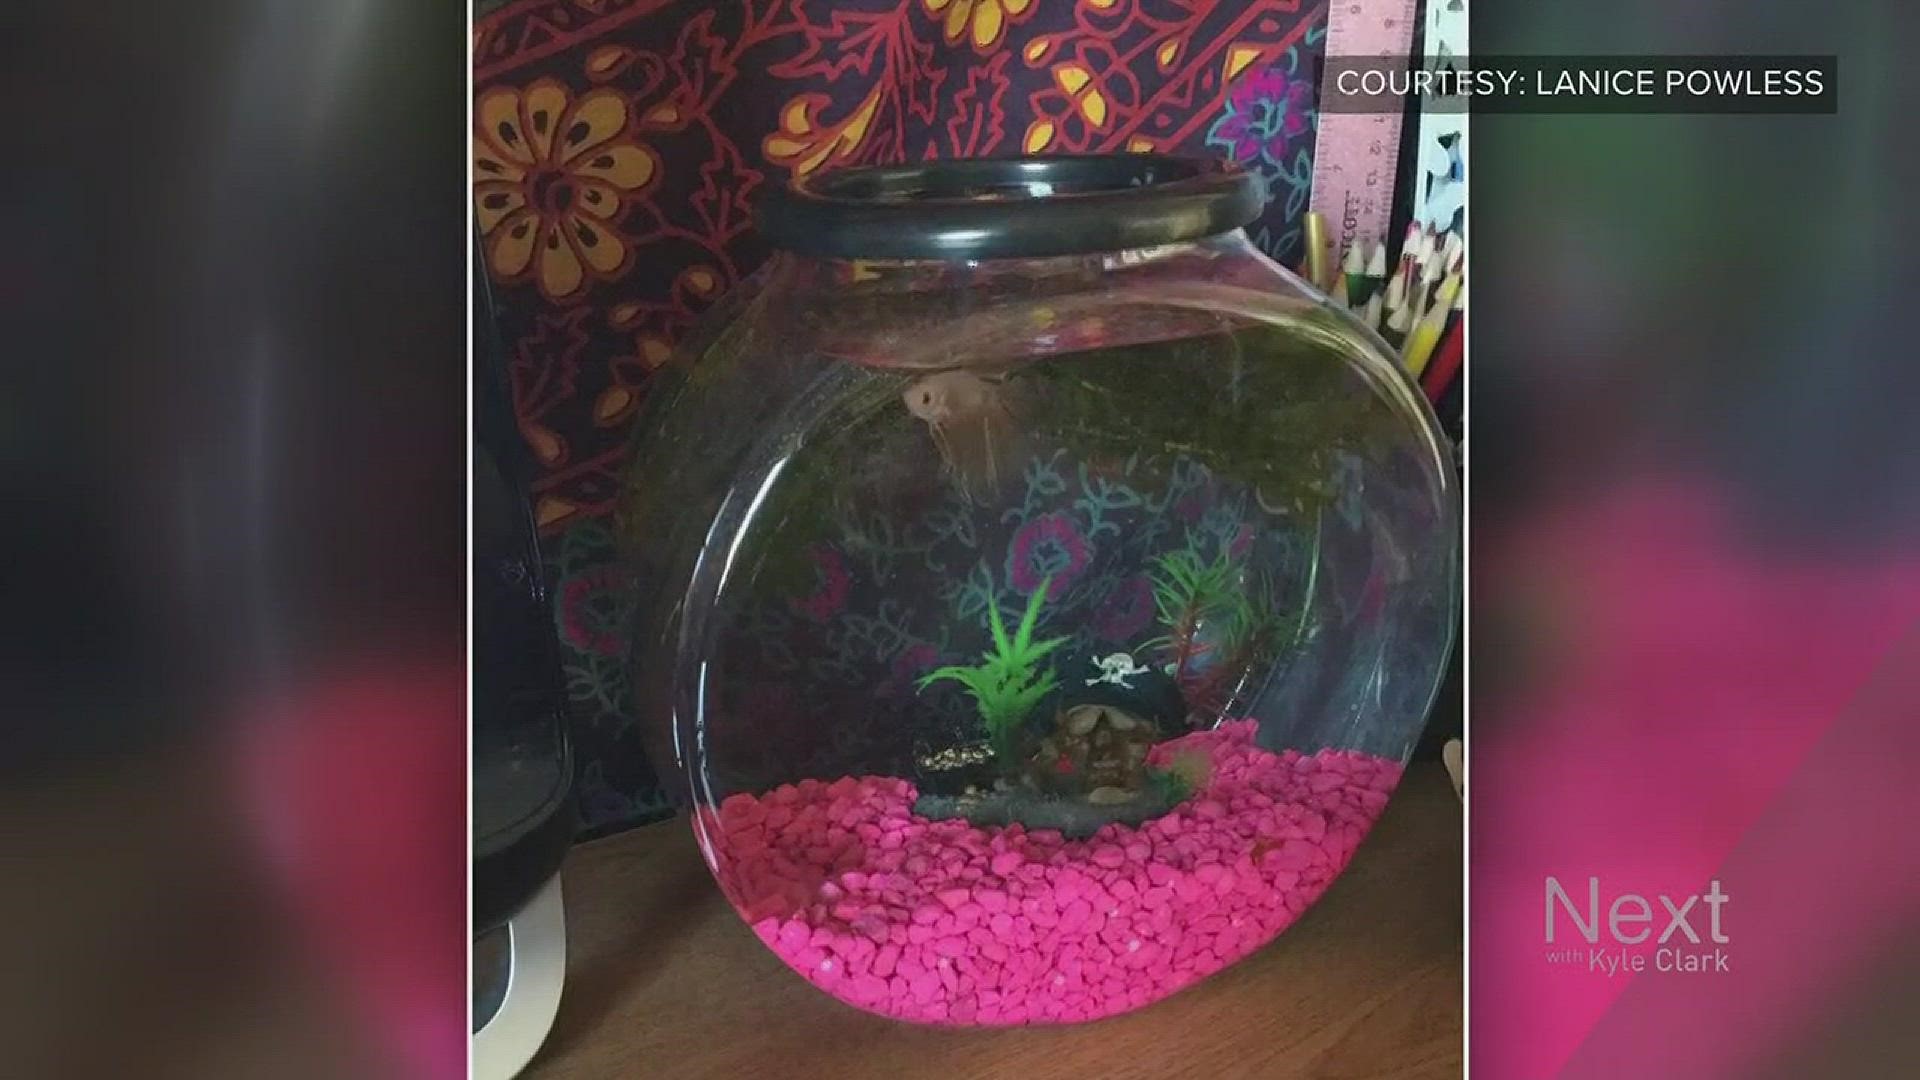 Lanice Powless was traveling home to California through Denver International Airport last week for the holidays. She is a student at the University of Colorado Colorado Springs, where she lives in the dorms with her pink pet Betta fish “Cassie.”